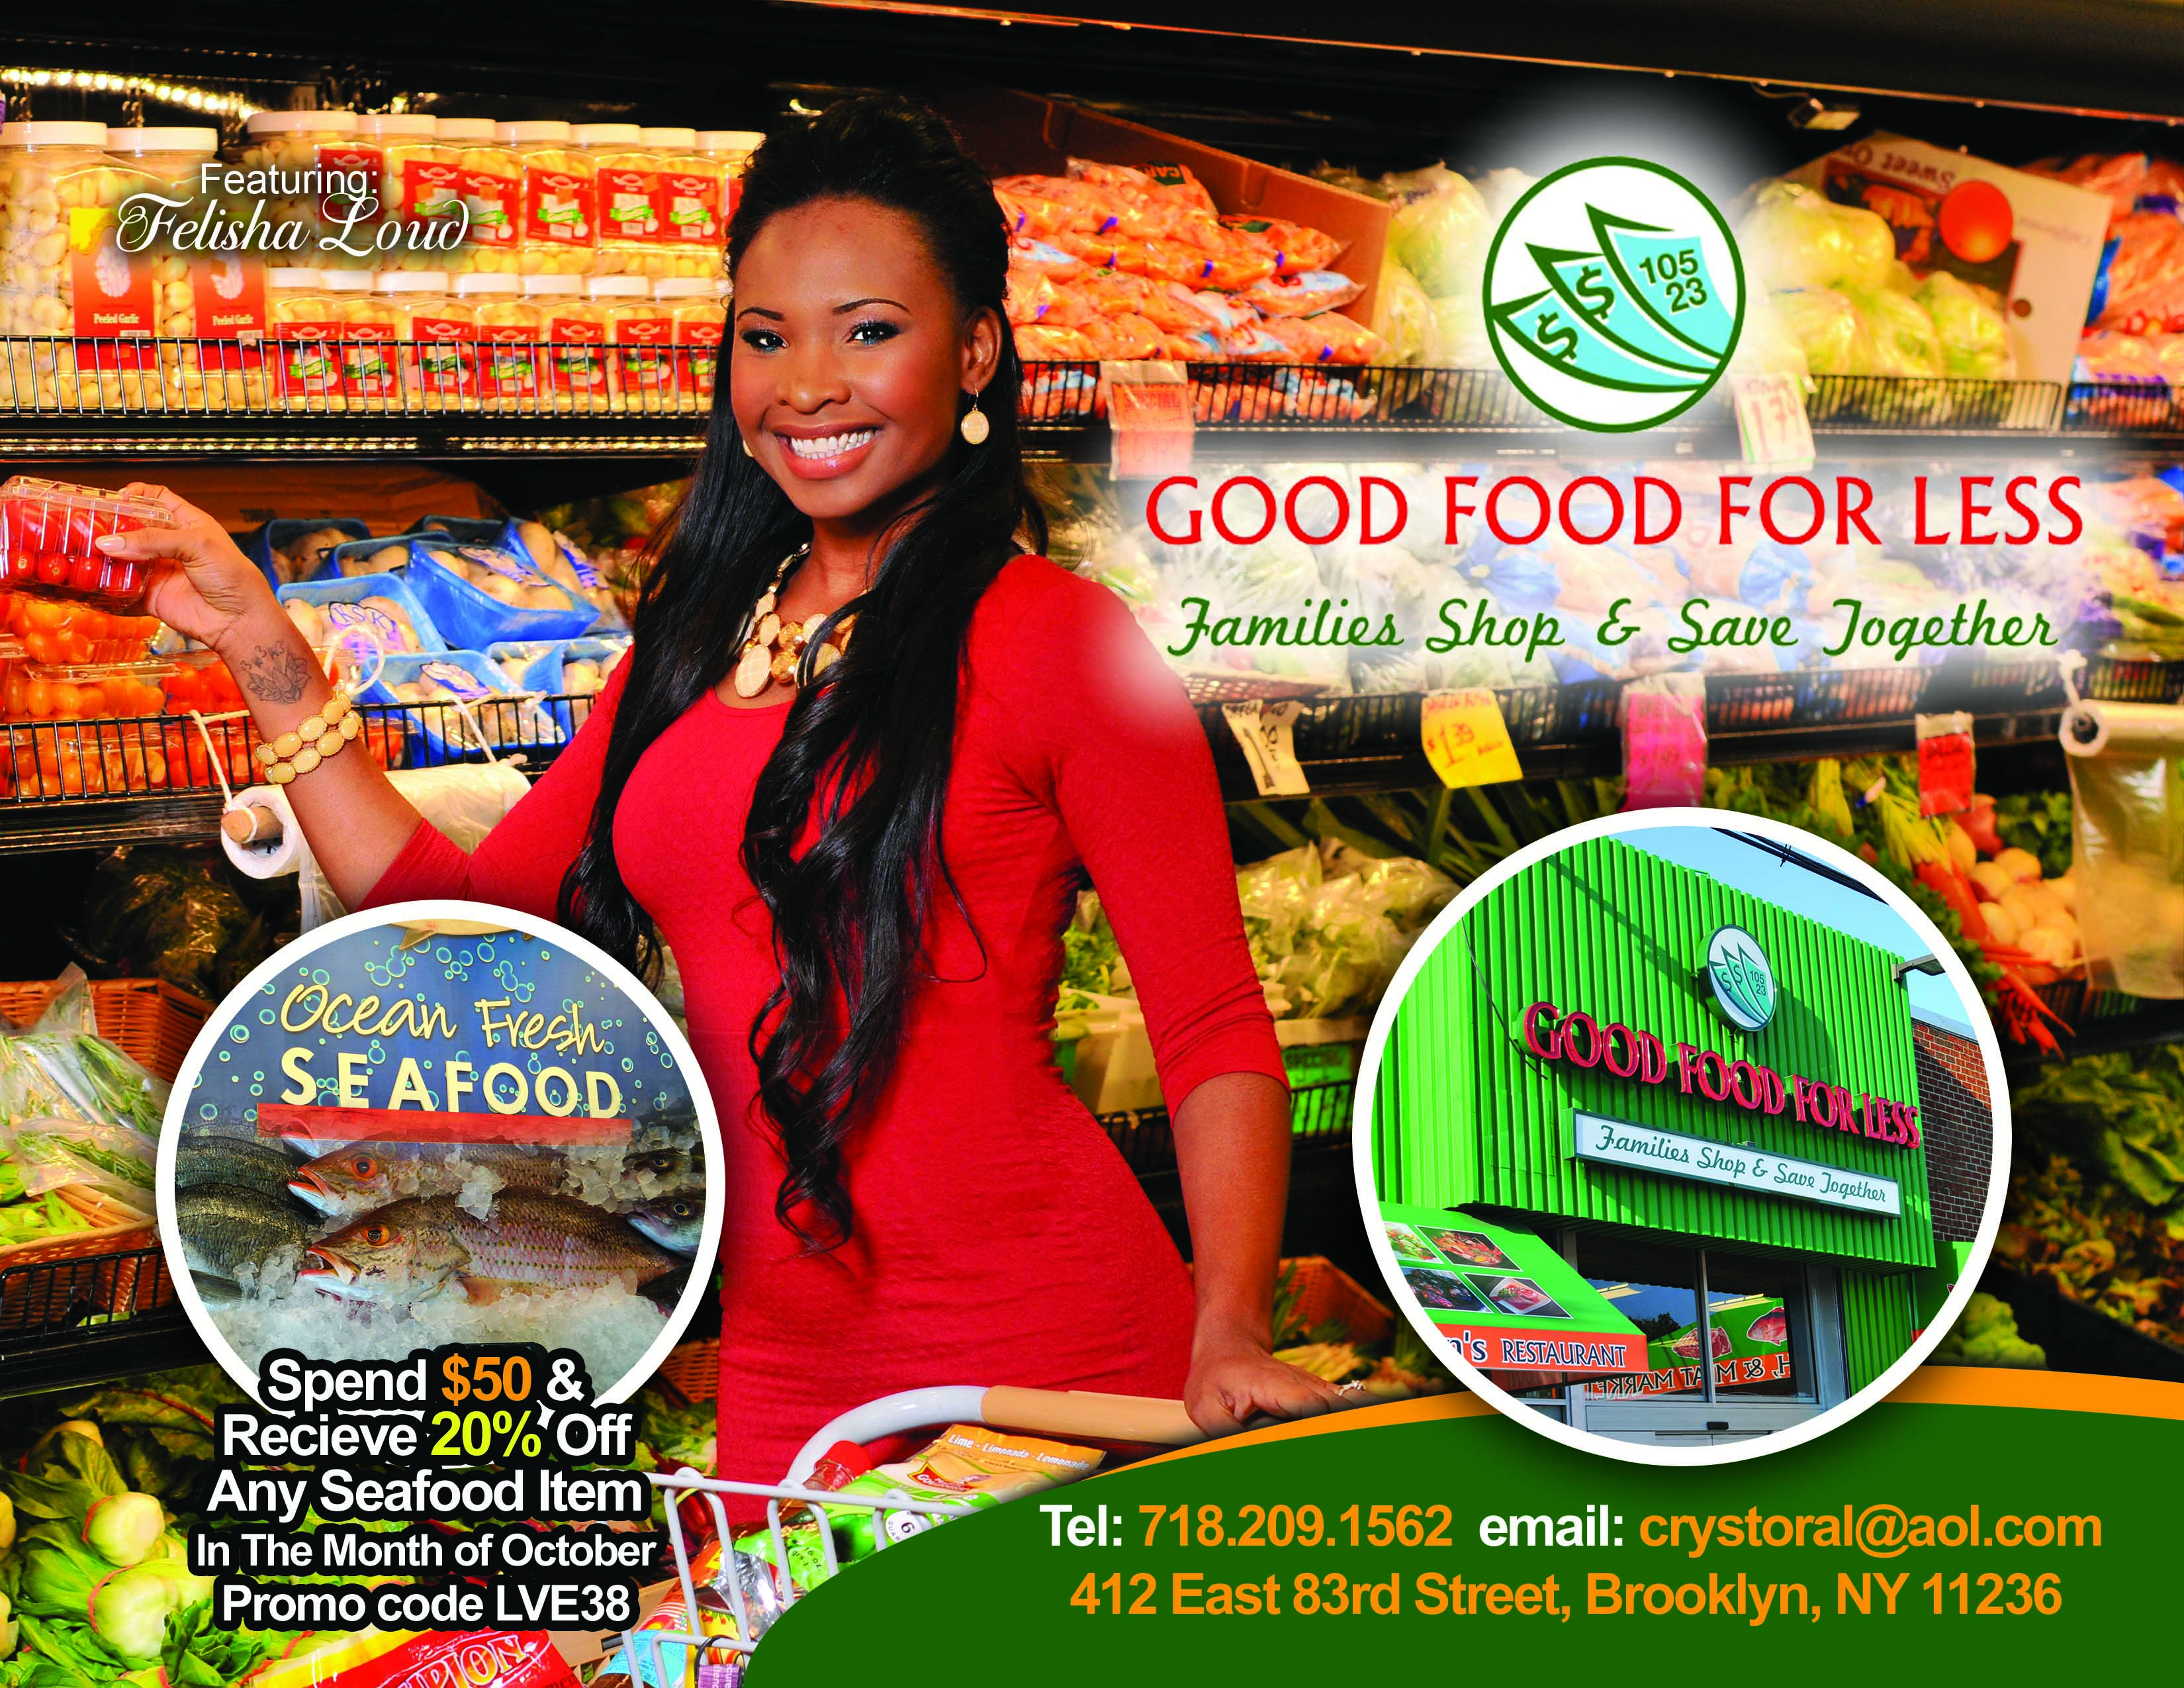 Felisha Lord In a print Add for Good Food For Less grocery store.